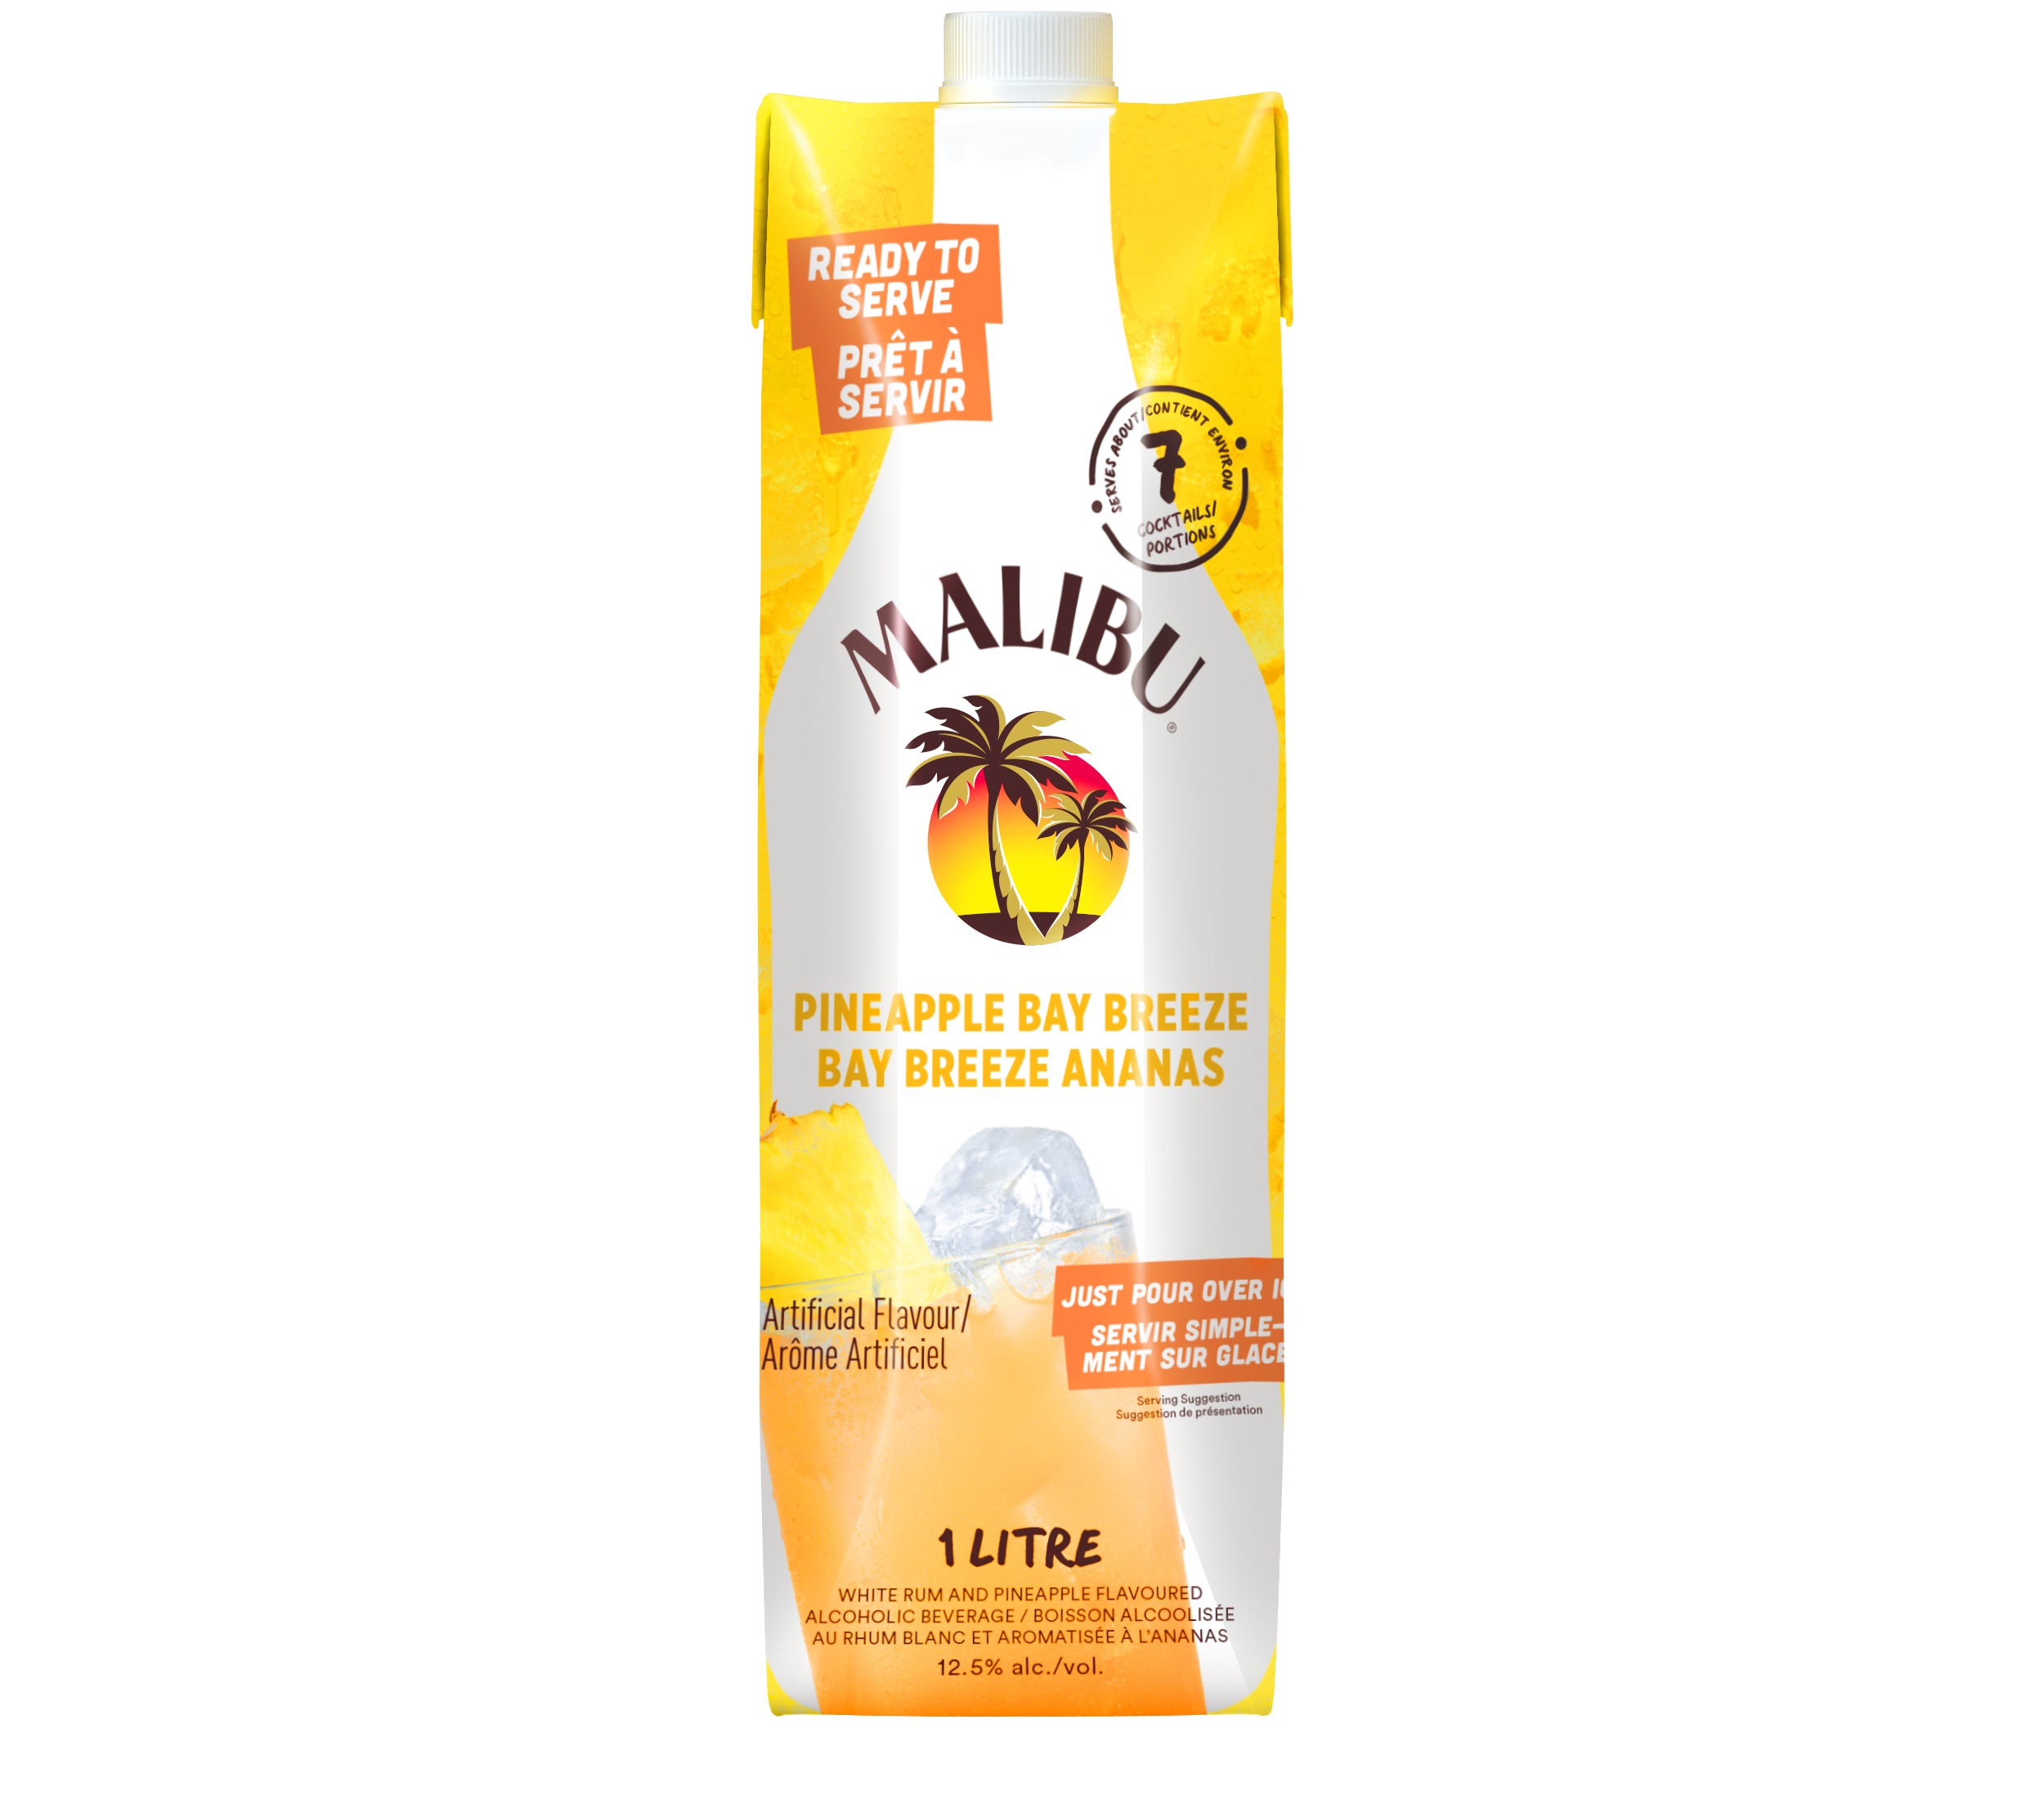 Malibu Pineapple Bay Breeze drink carton with logo, product name, and a 1-liter measurement